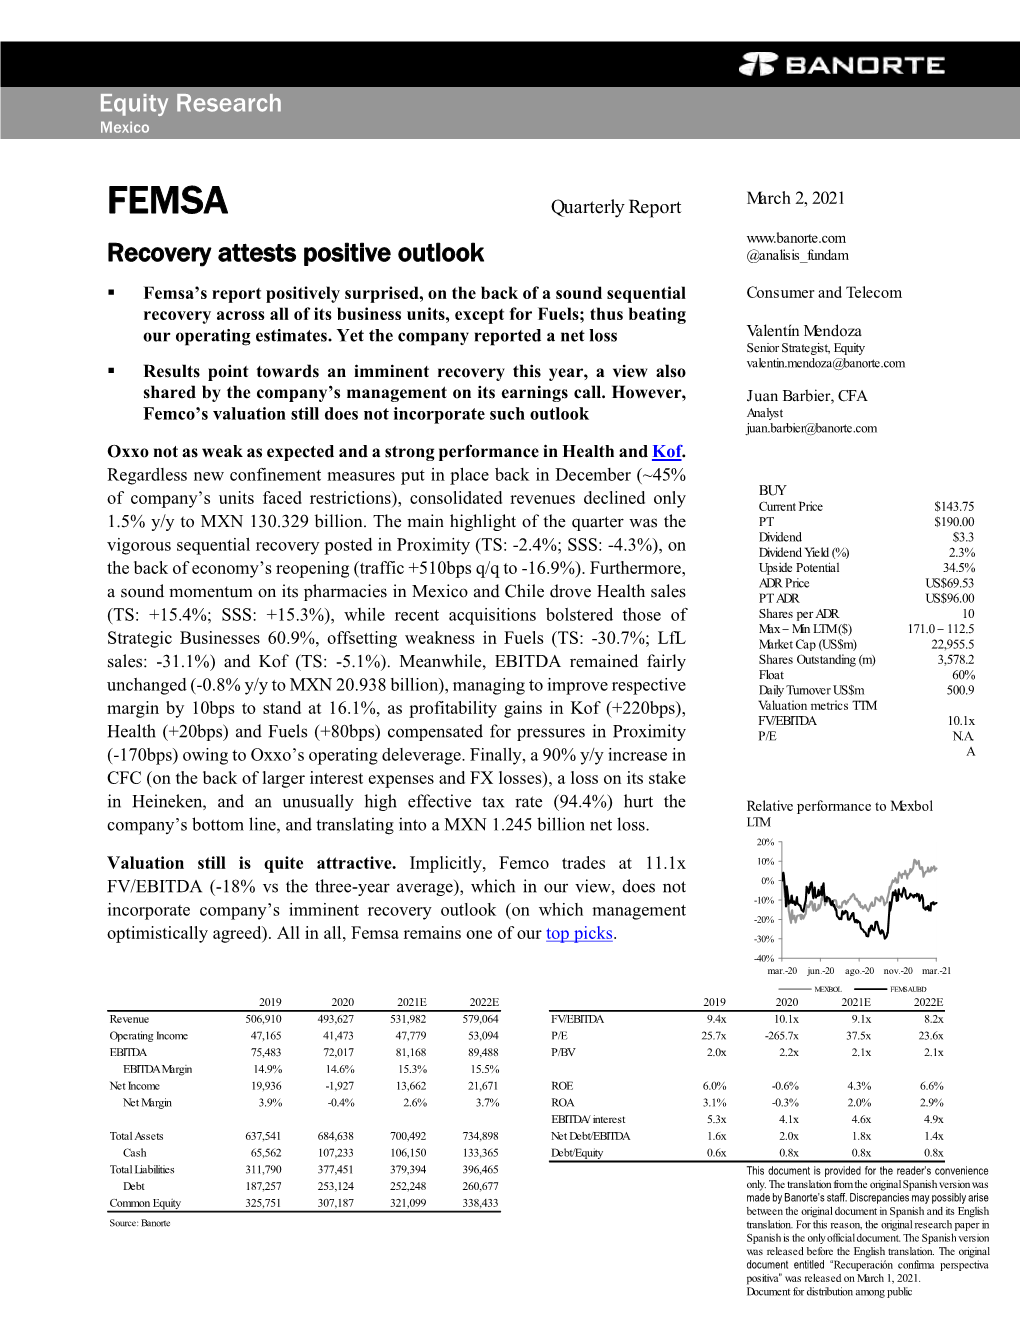 FEMSA Recovery Attests Positive Outlook @Analisis Fundam